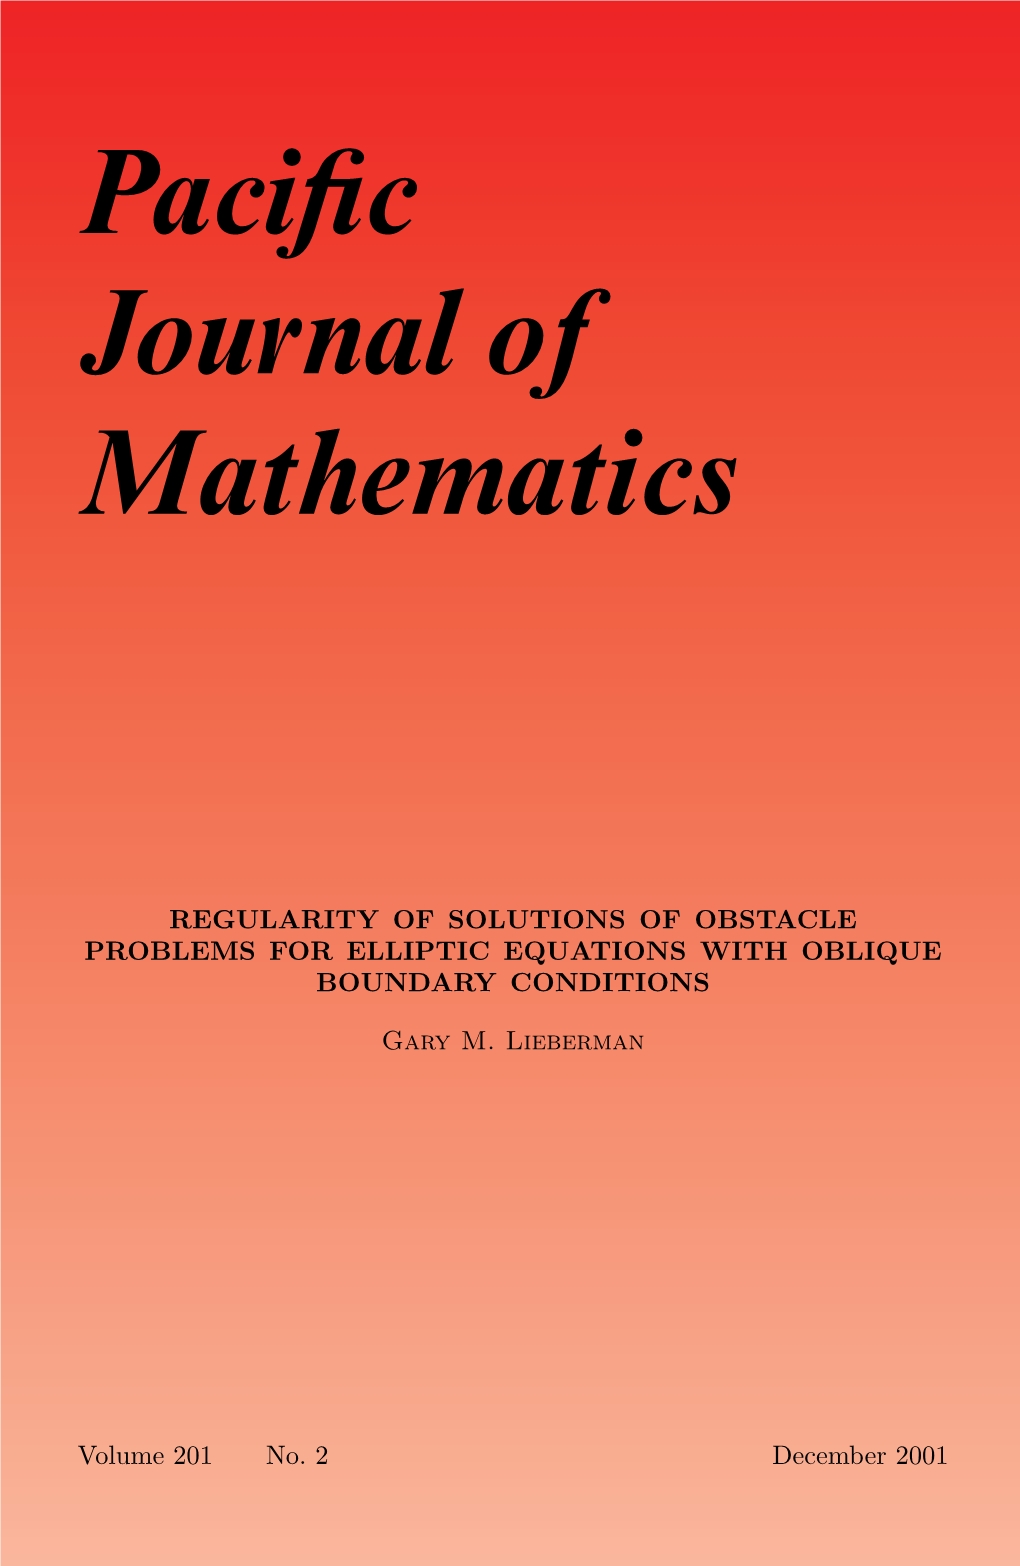 Regularity of Solutions of Obstacle Problems for Elliptic Equations with Oblique Boundary Conditions